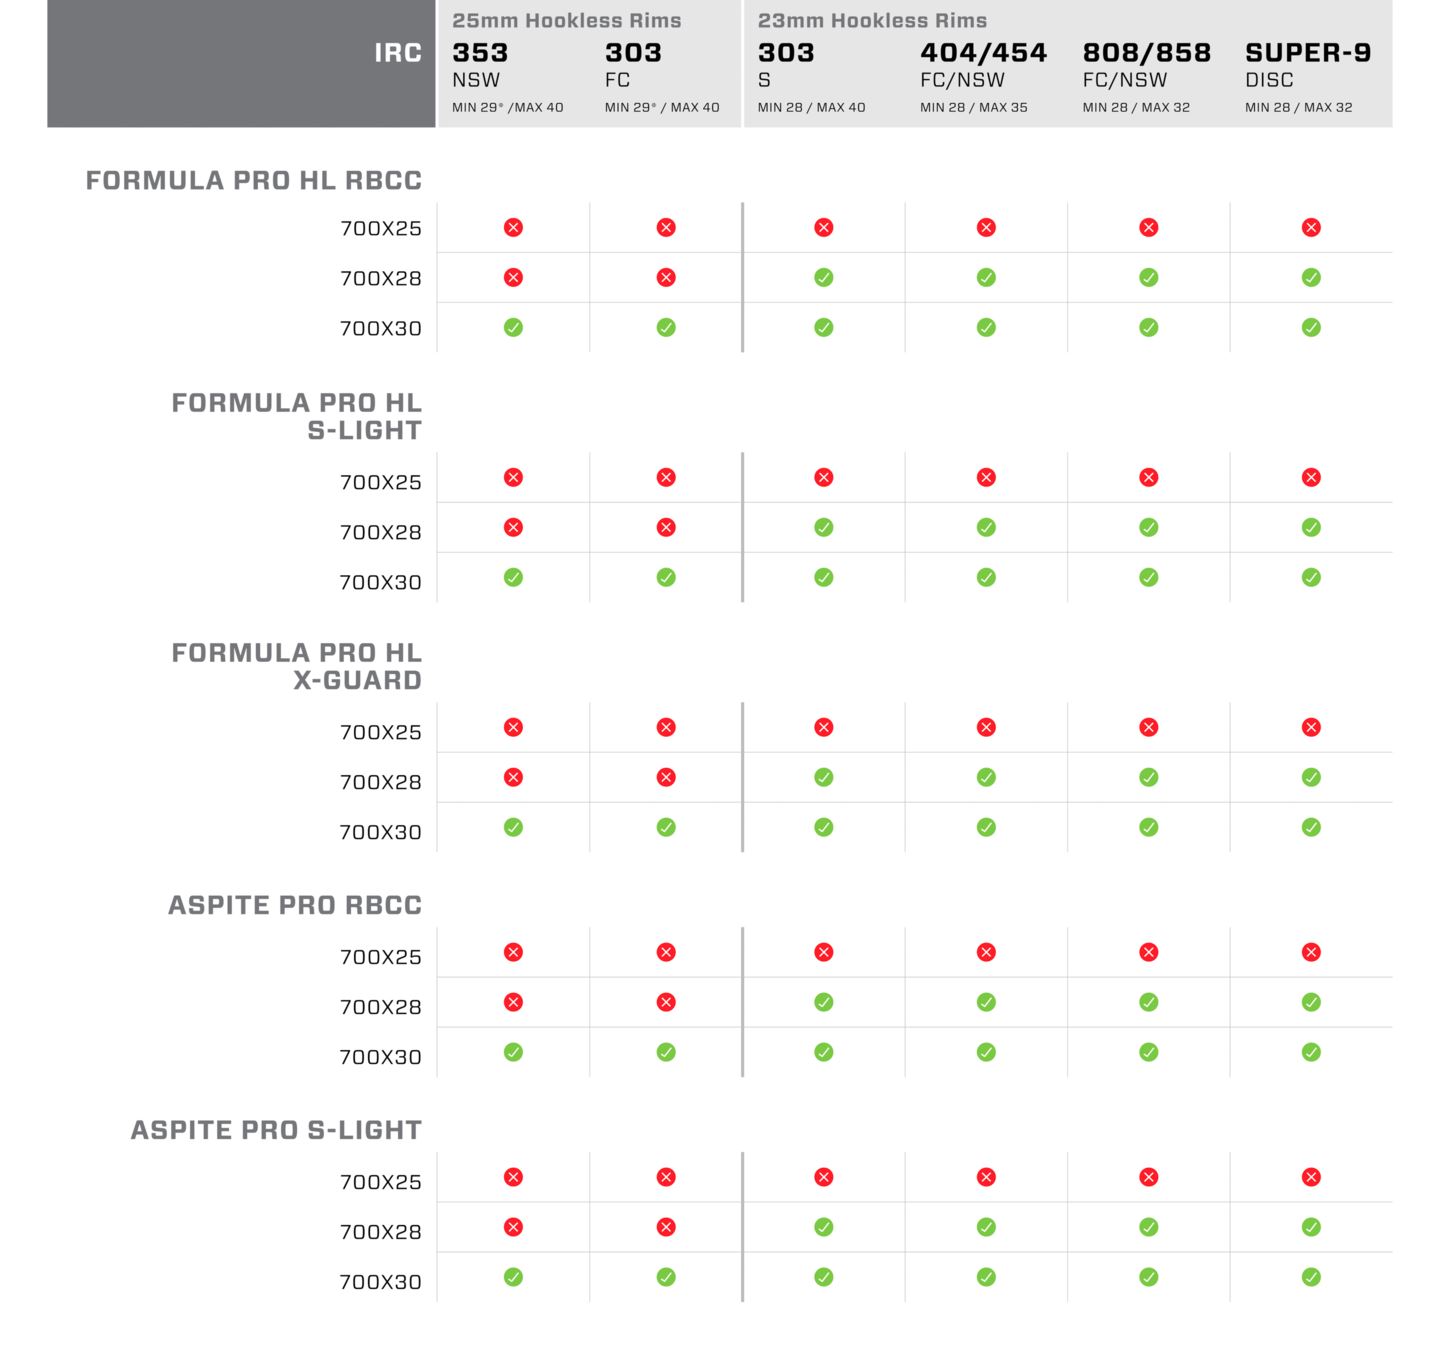 chart showing compatibility between IRC tires and Zipp wheels.